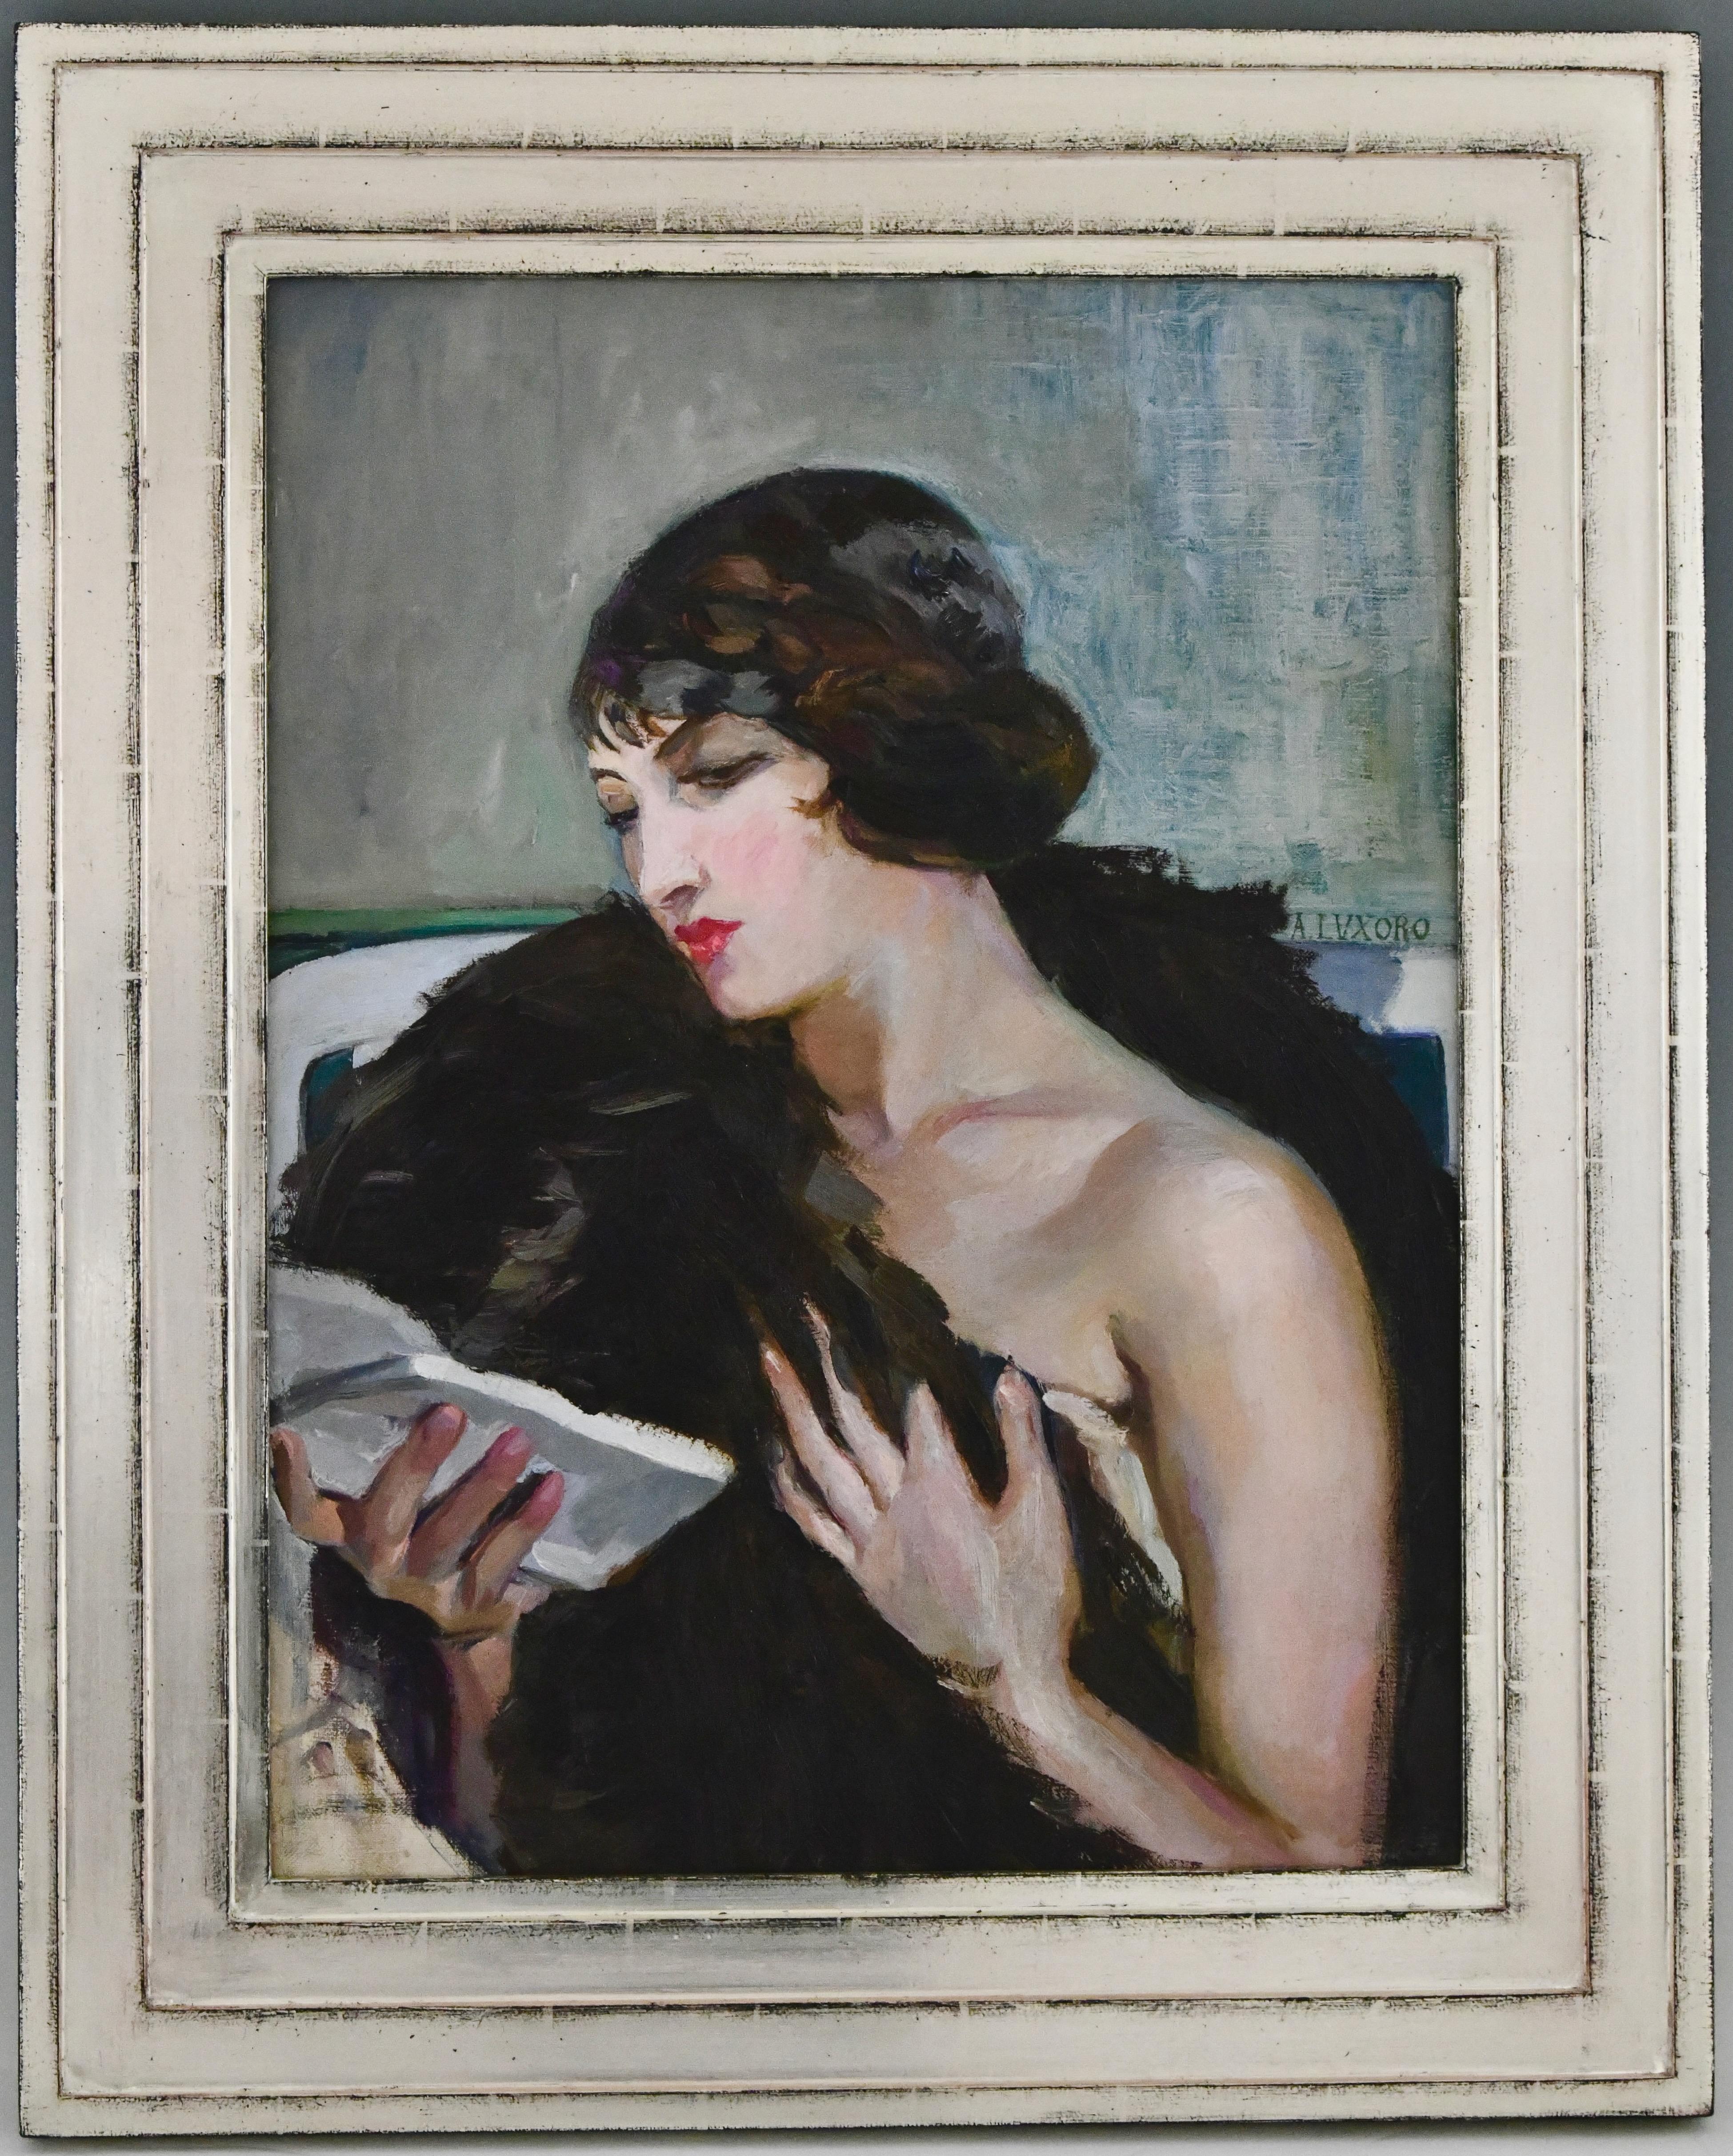 Art Deco painting elegant lady with book by Alfredo Luxoro, Italy 1859-1918.
Oil on canvas. Ca. 1910. 
Handmade silver leaf frame by Gehring & Heijdenrijk. 
With Certificate of Authenticity. 
Size framed:
H. 76.5 cm x L. 62 cm x D. 4 cm
H.